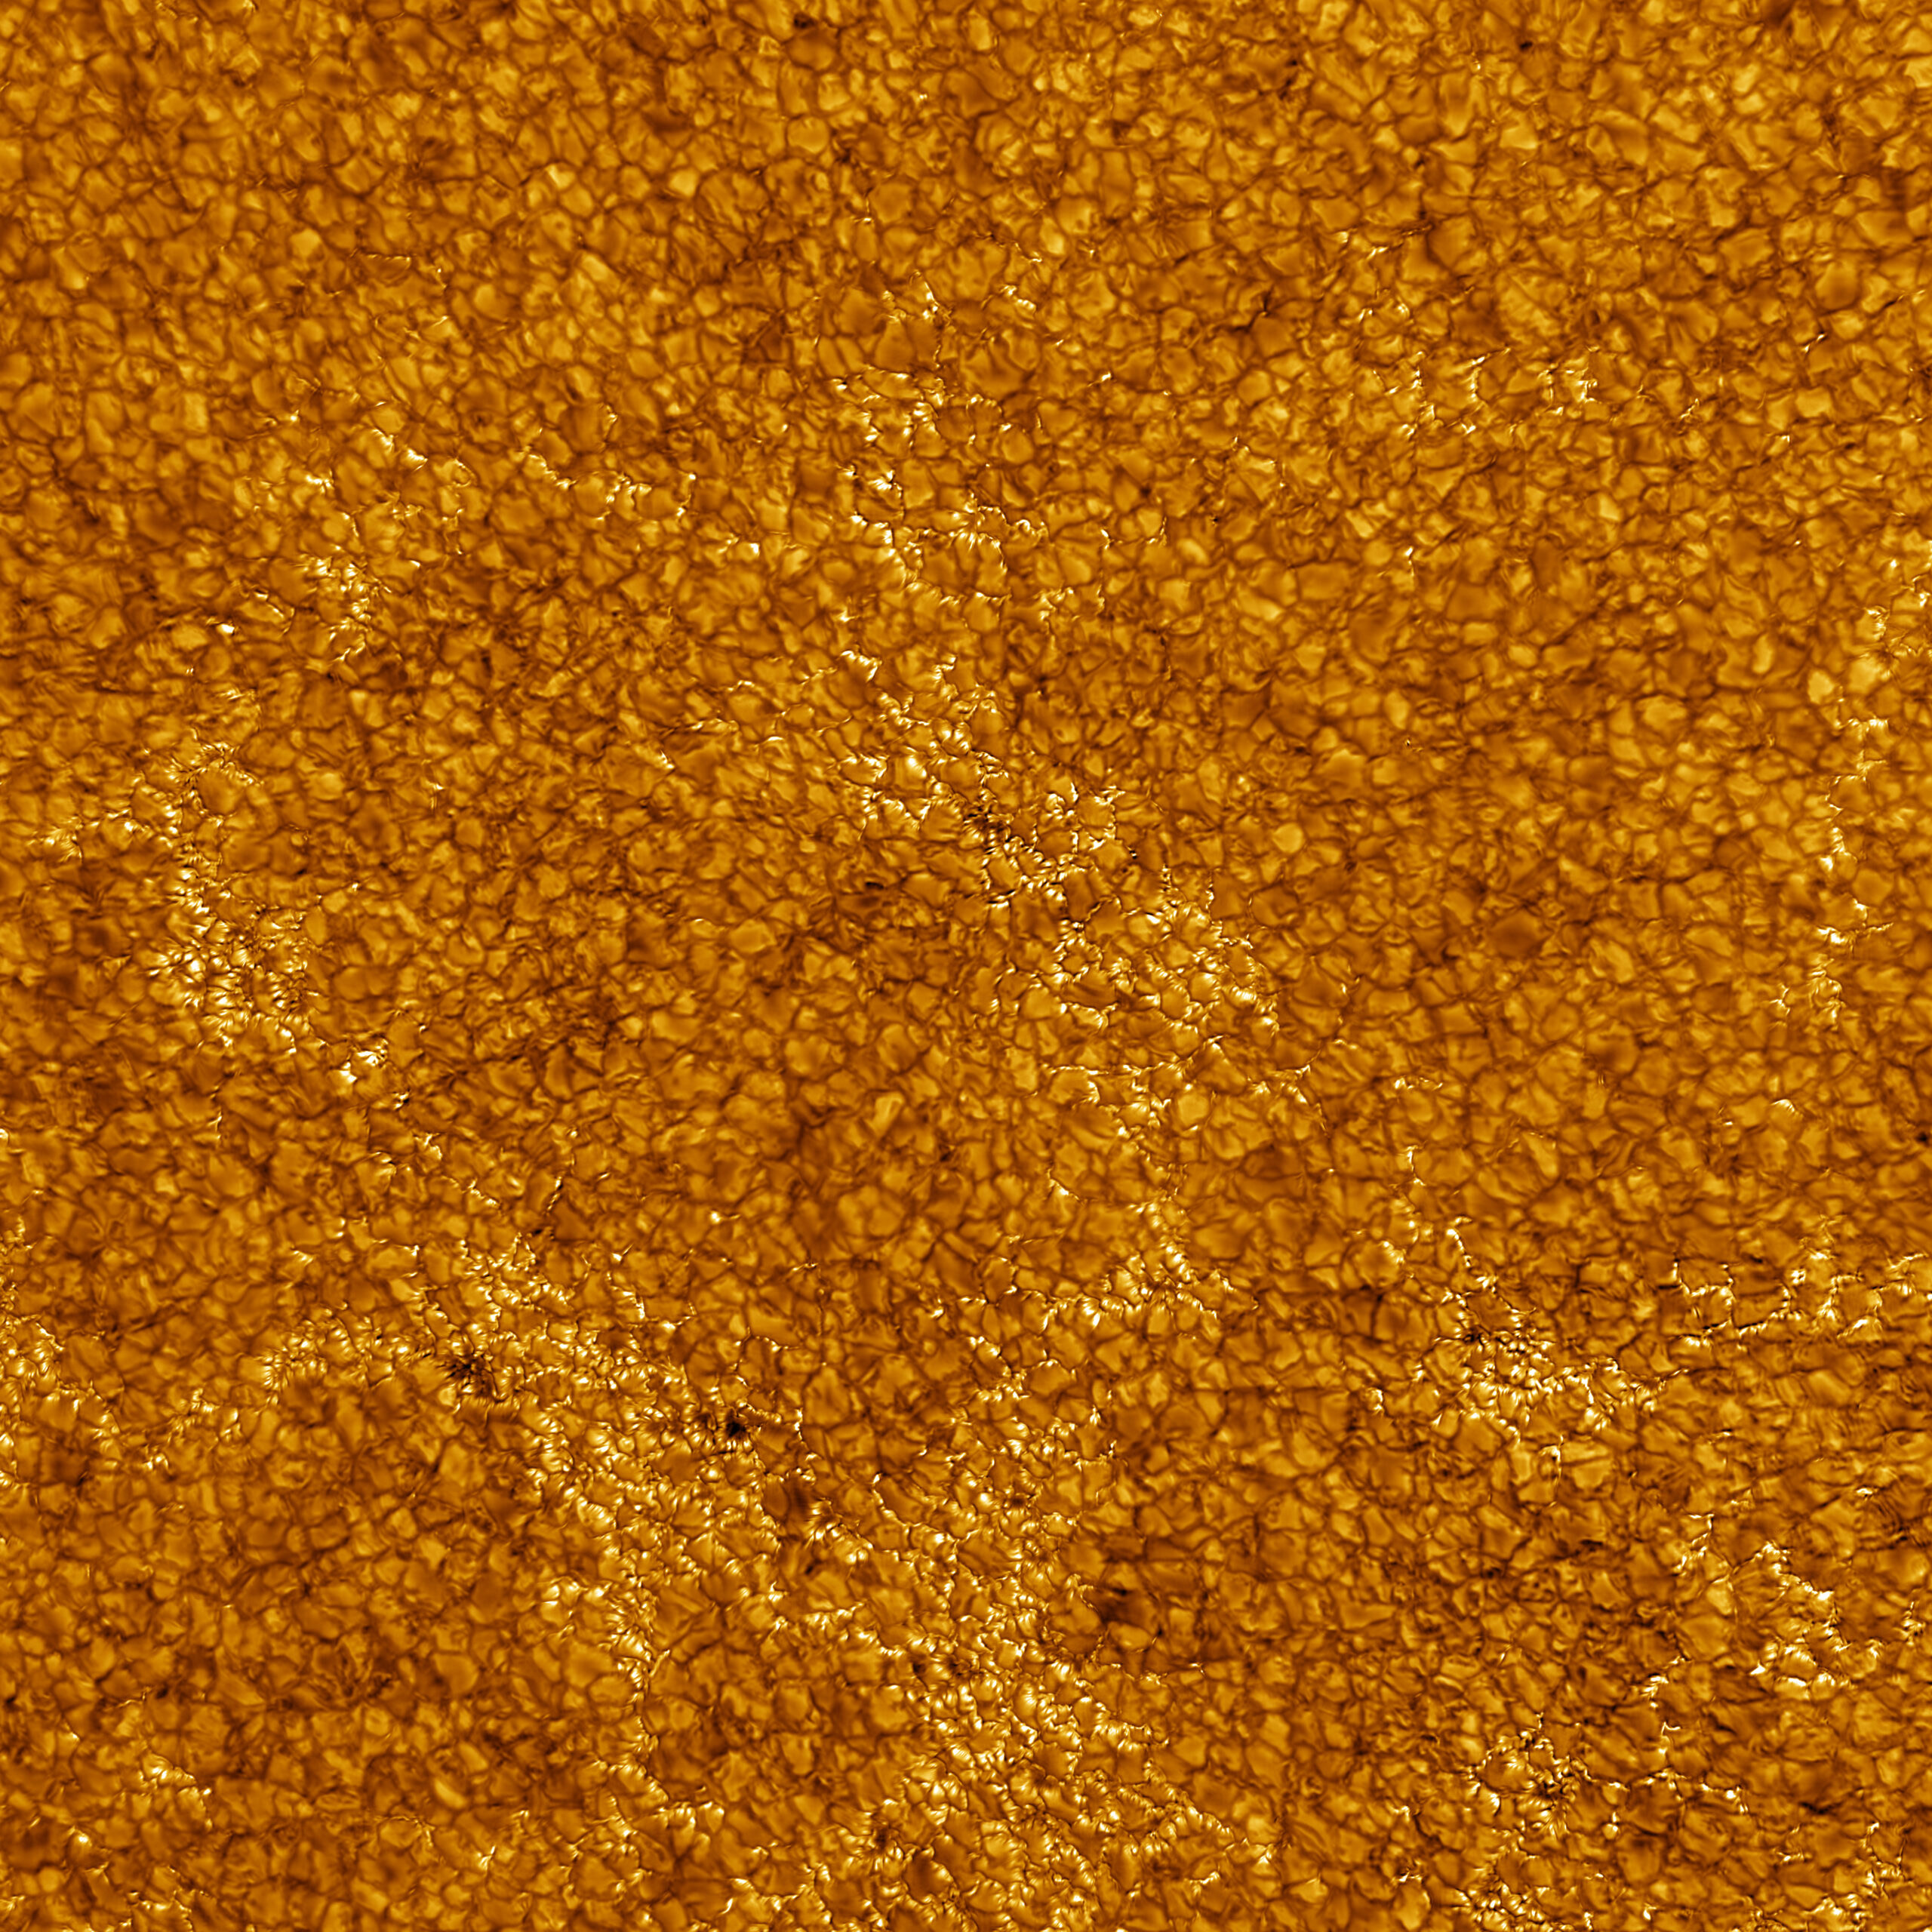 first images of the Sun's chromosphere